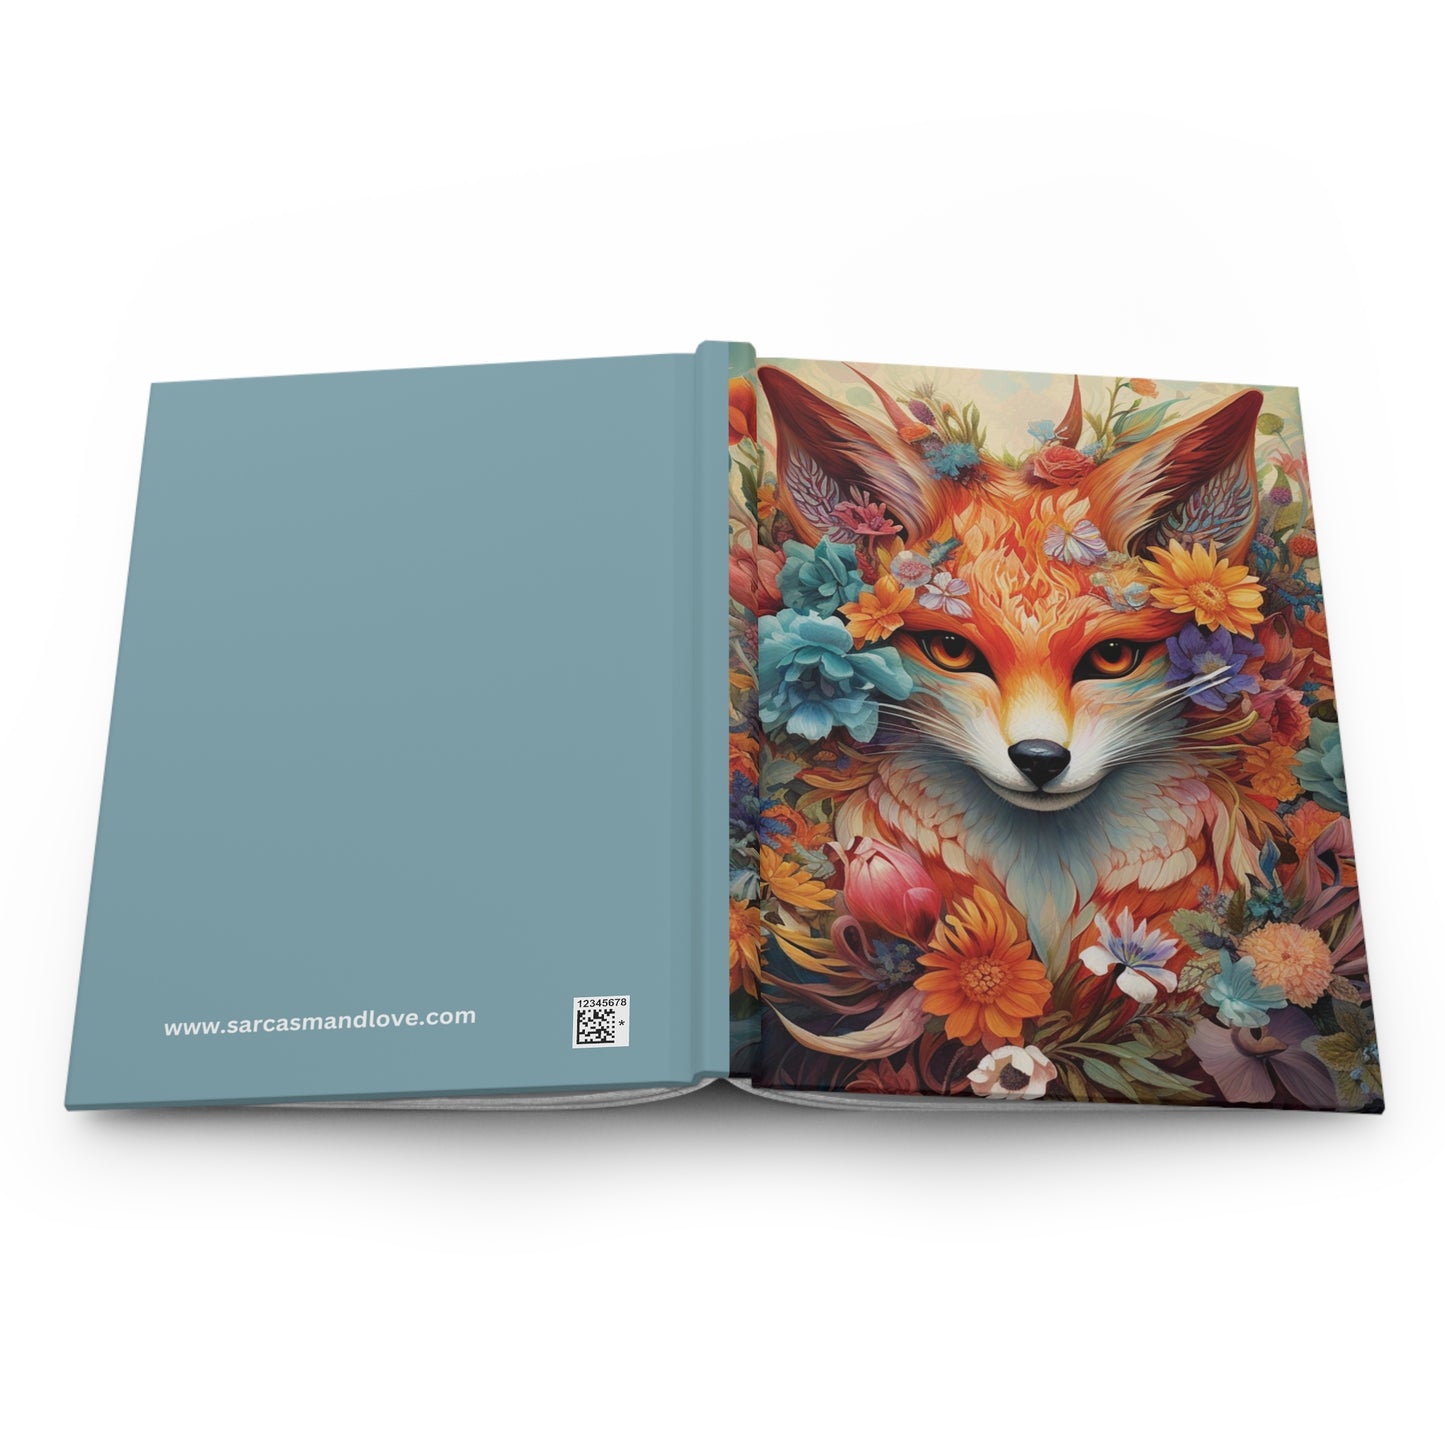 Floral Fox Hardcover Notebook - Artistic Journal, Lined, Creative Writing, Gratitude and Wellness Diary, Gift for Nature Lovers, 5.75"x7.5"